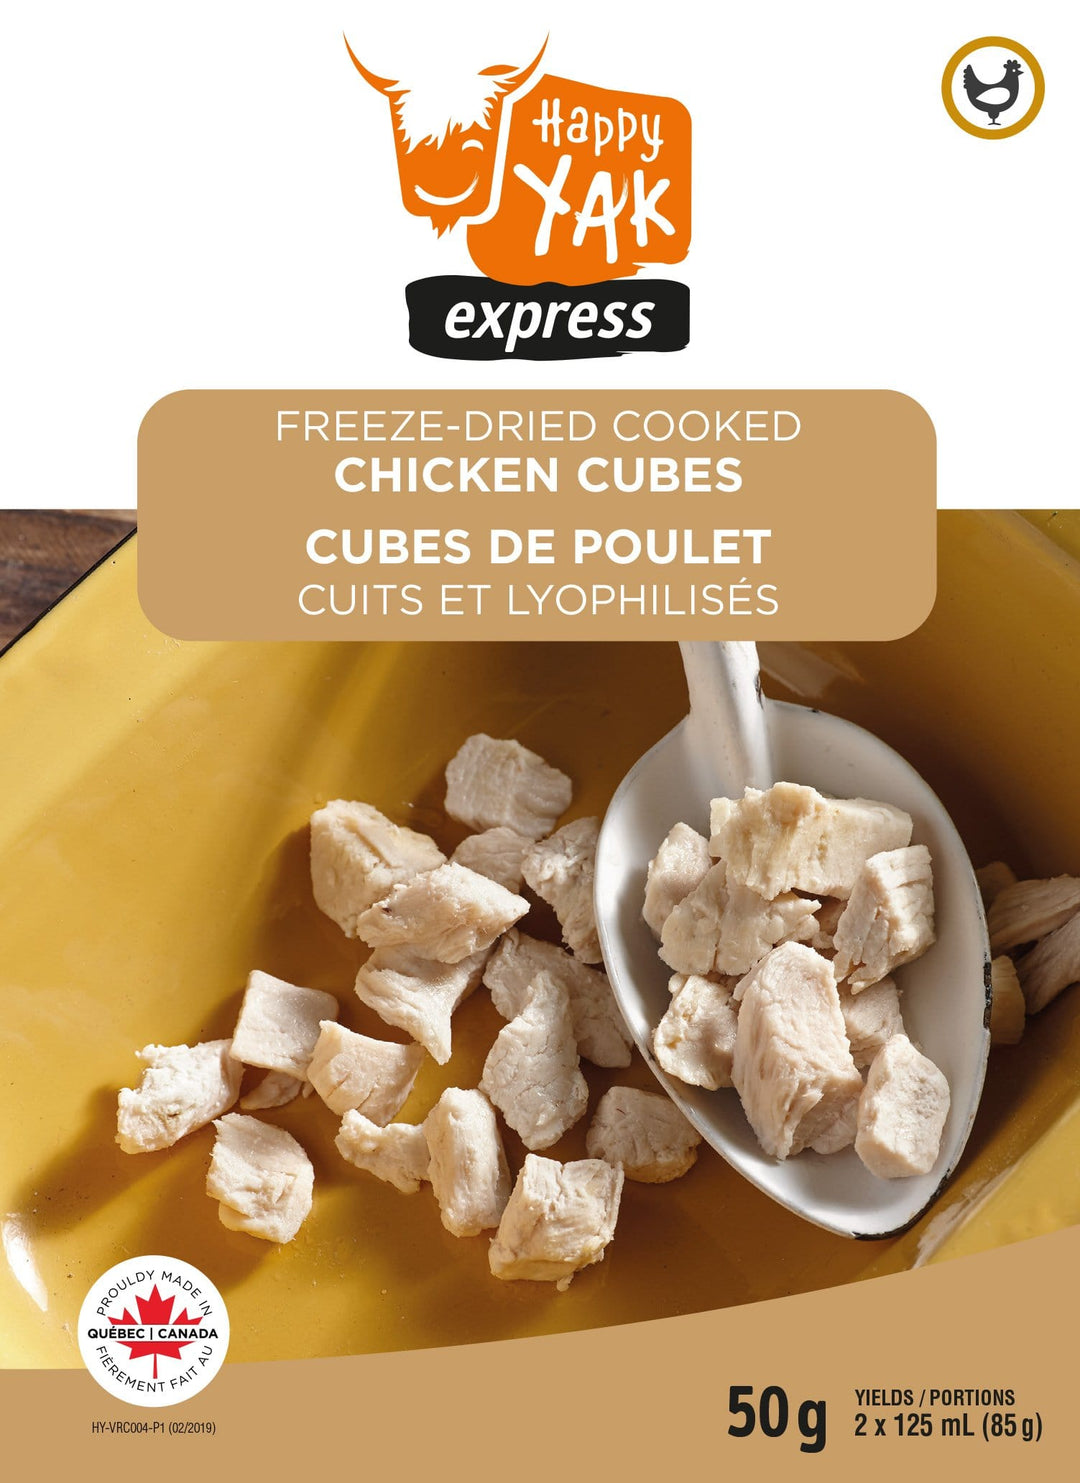 Happy Yak Freeze-Dried Cooked Chicken Cubes (50g)